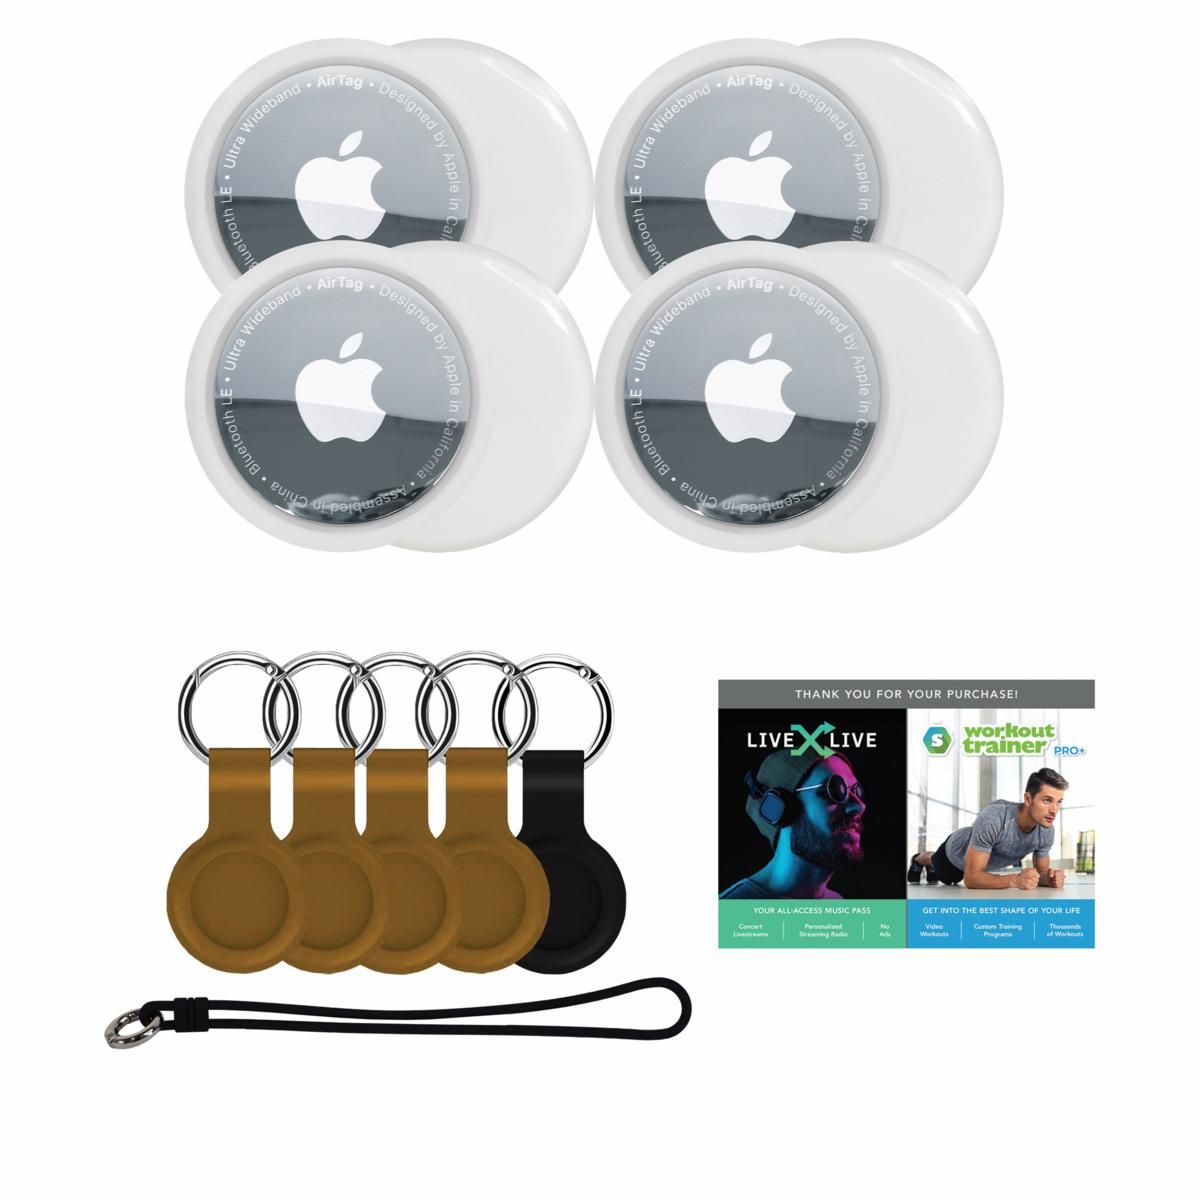 Apple AirTag 4-pack Bundle with Keychains, Luggage Tag & Voucher - 20195473 | HSN | HSN